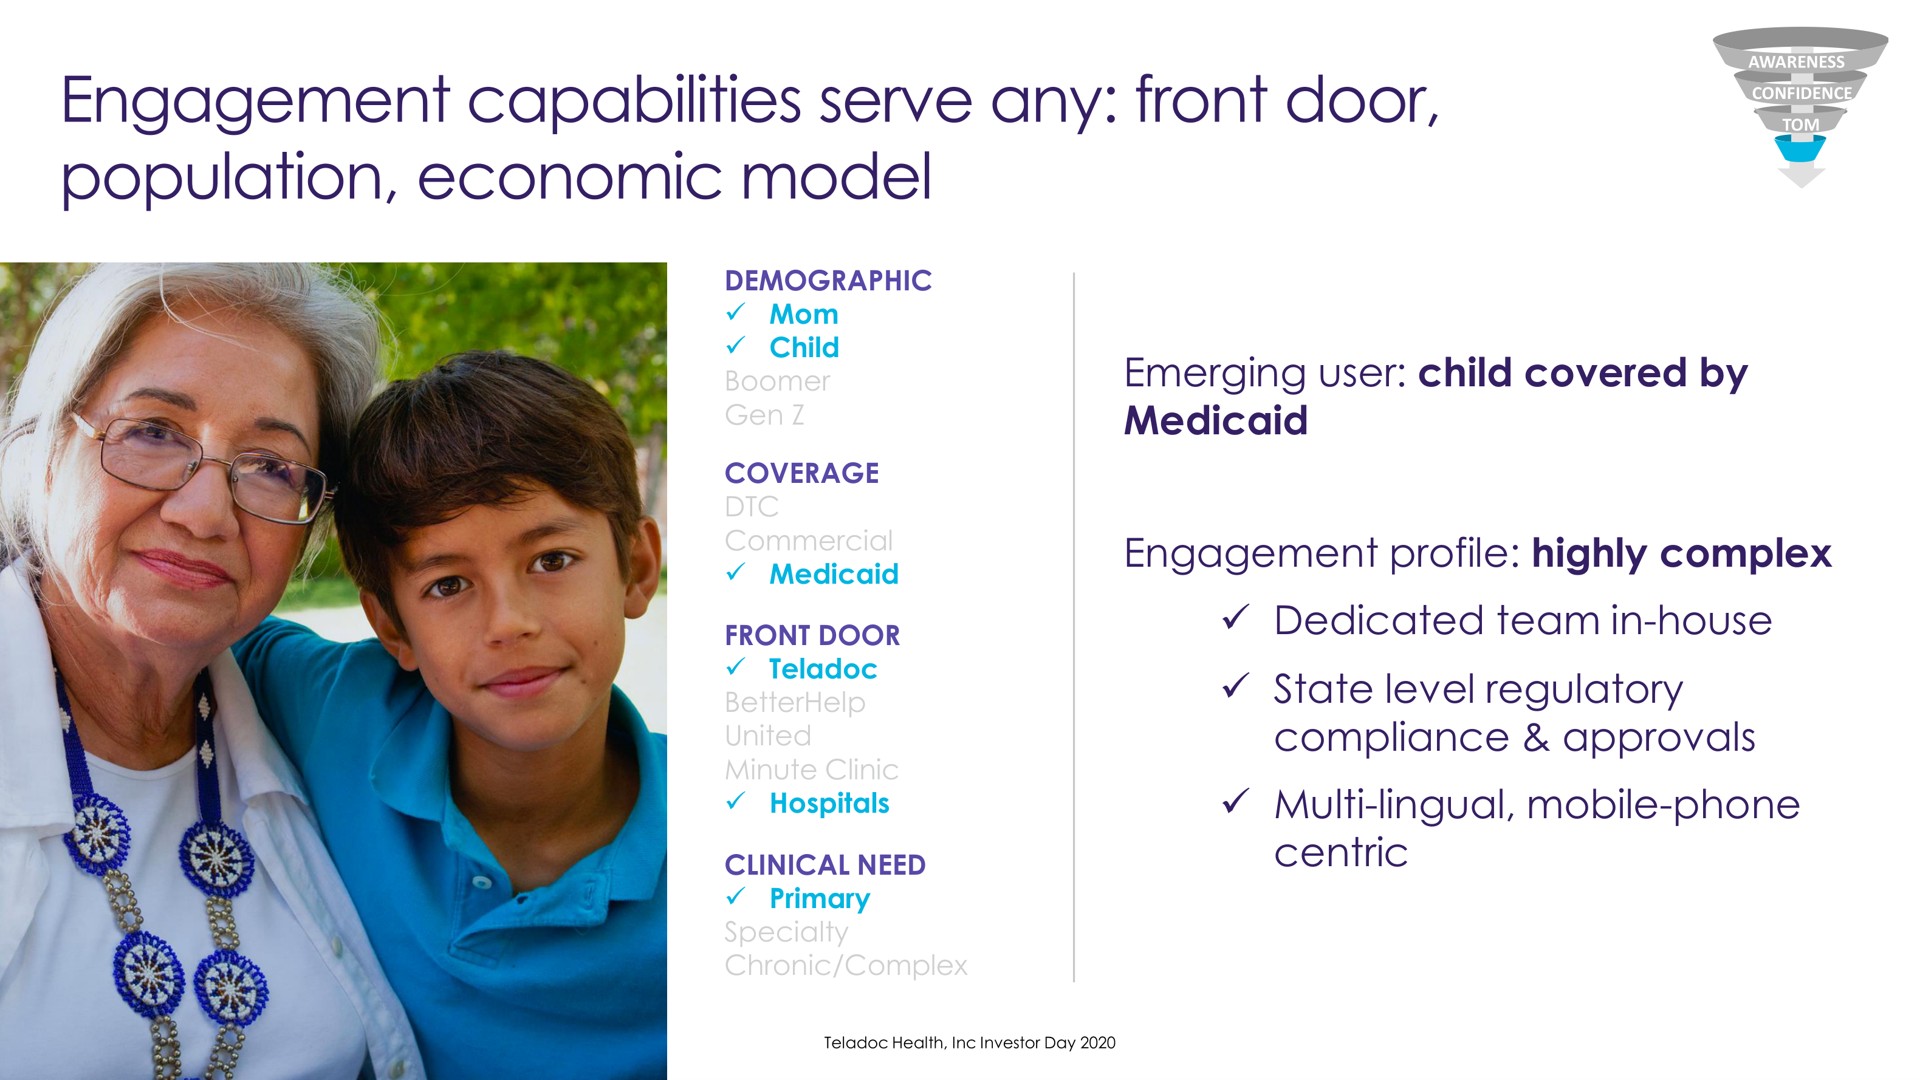 emerging user child covered by engagement profile highly complex dedicated team in house state level regulatory compliance approvals lingual mobile phone centric capabilities serve any front door economic model | Teladoc